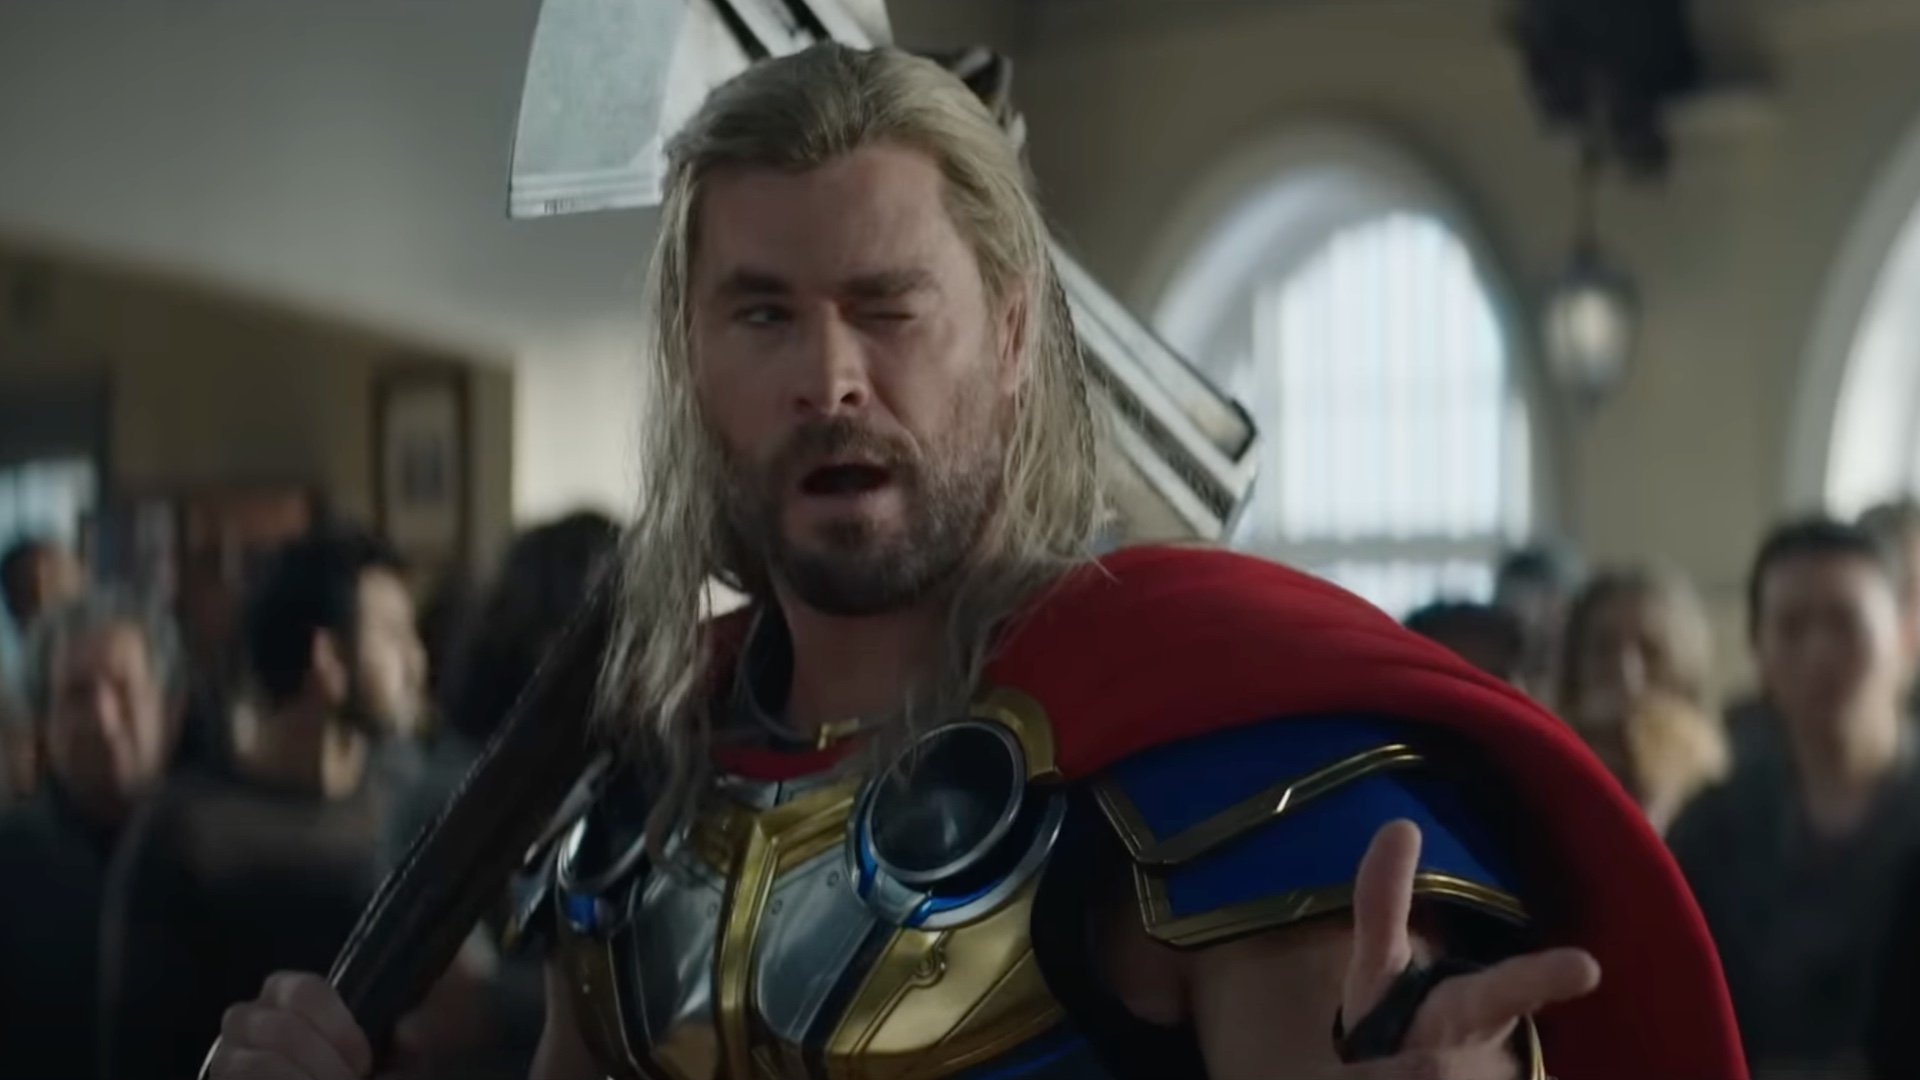 Chris Hemsworth Will Need Big Changes To Return For ‘Thor 5’, Won’t Be Part of ‘Star Trek 4’